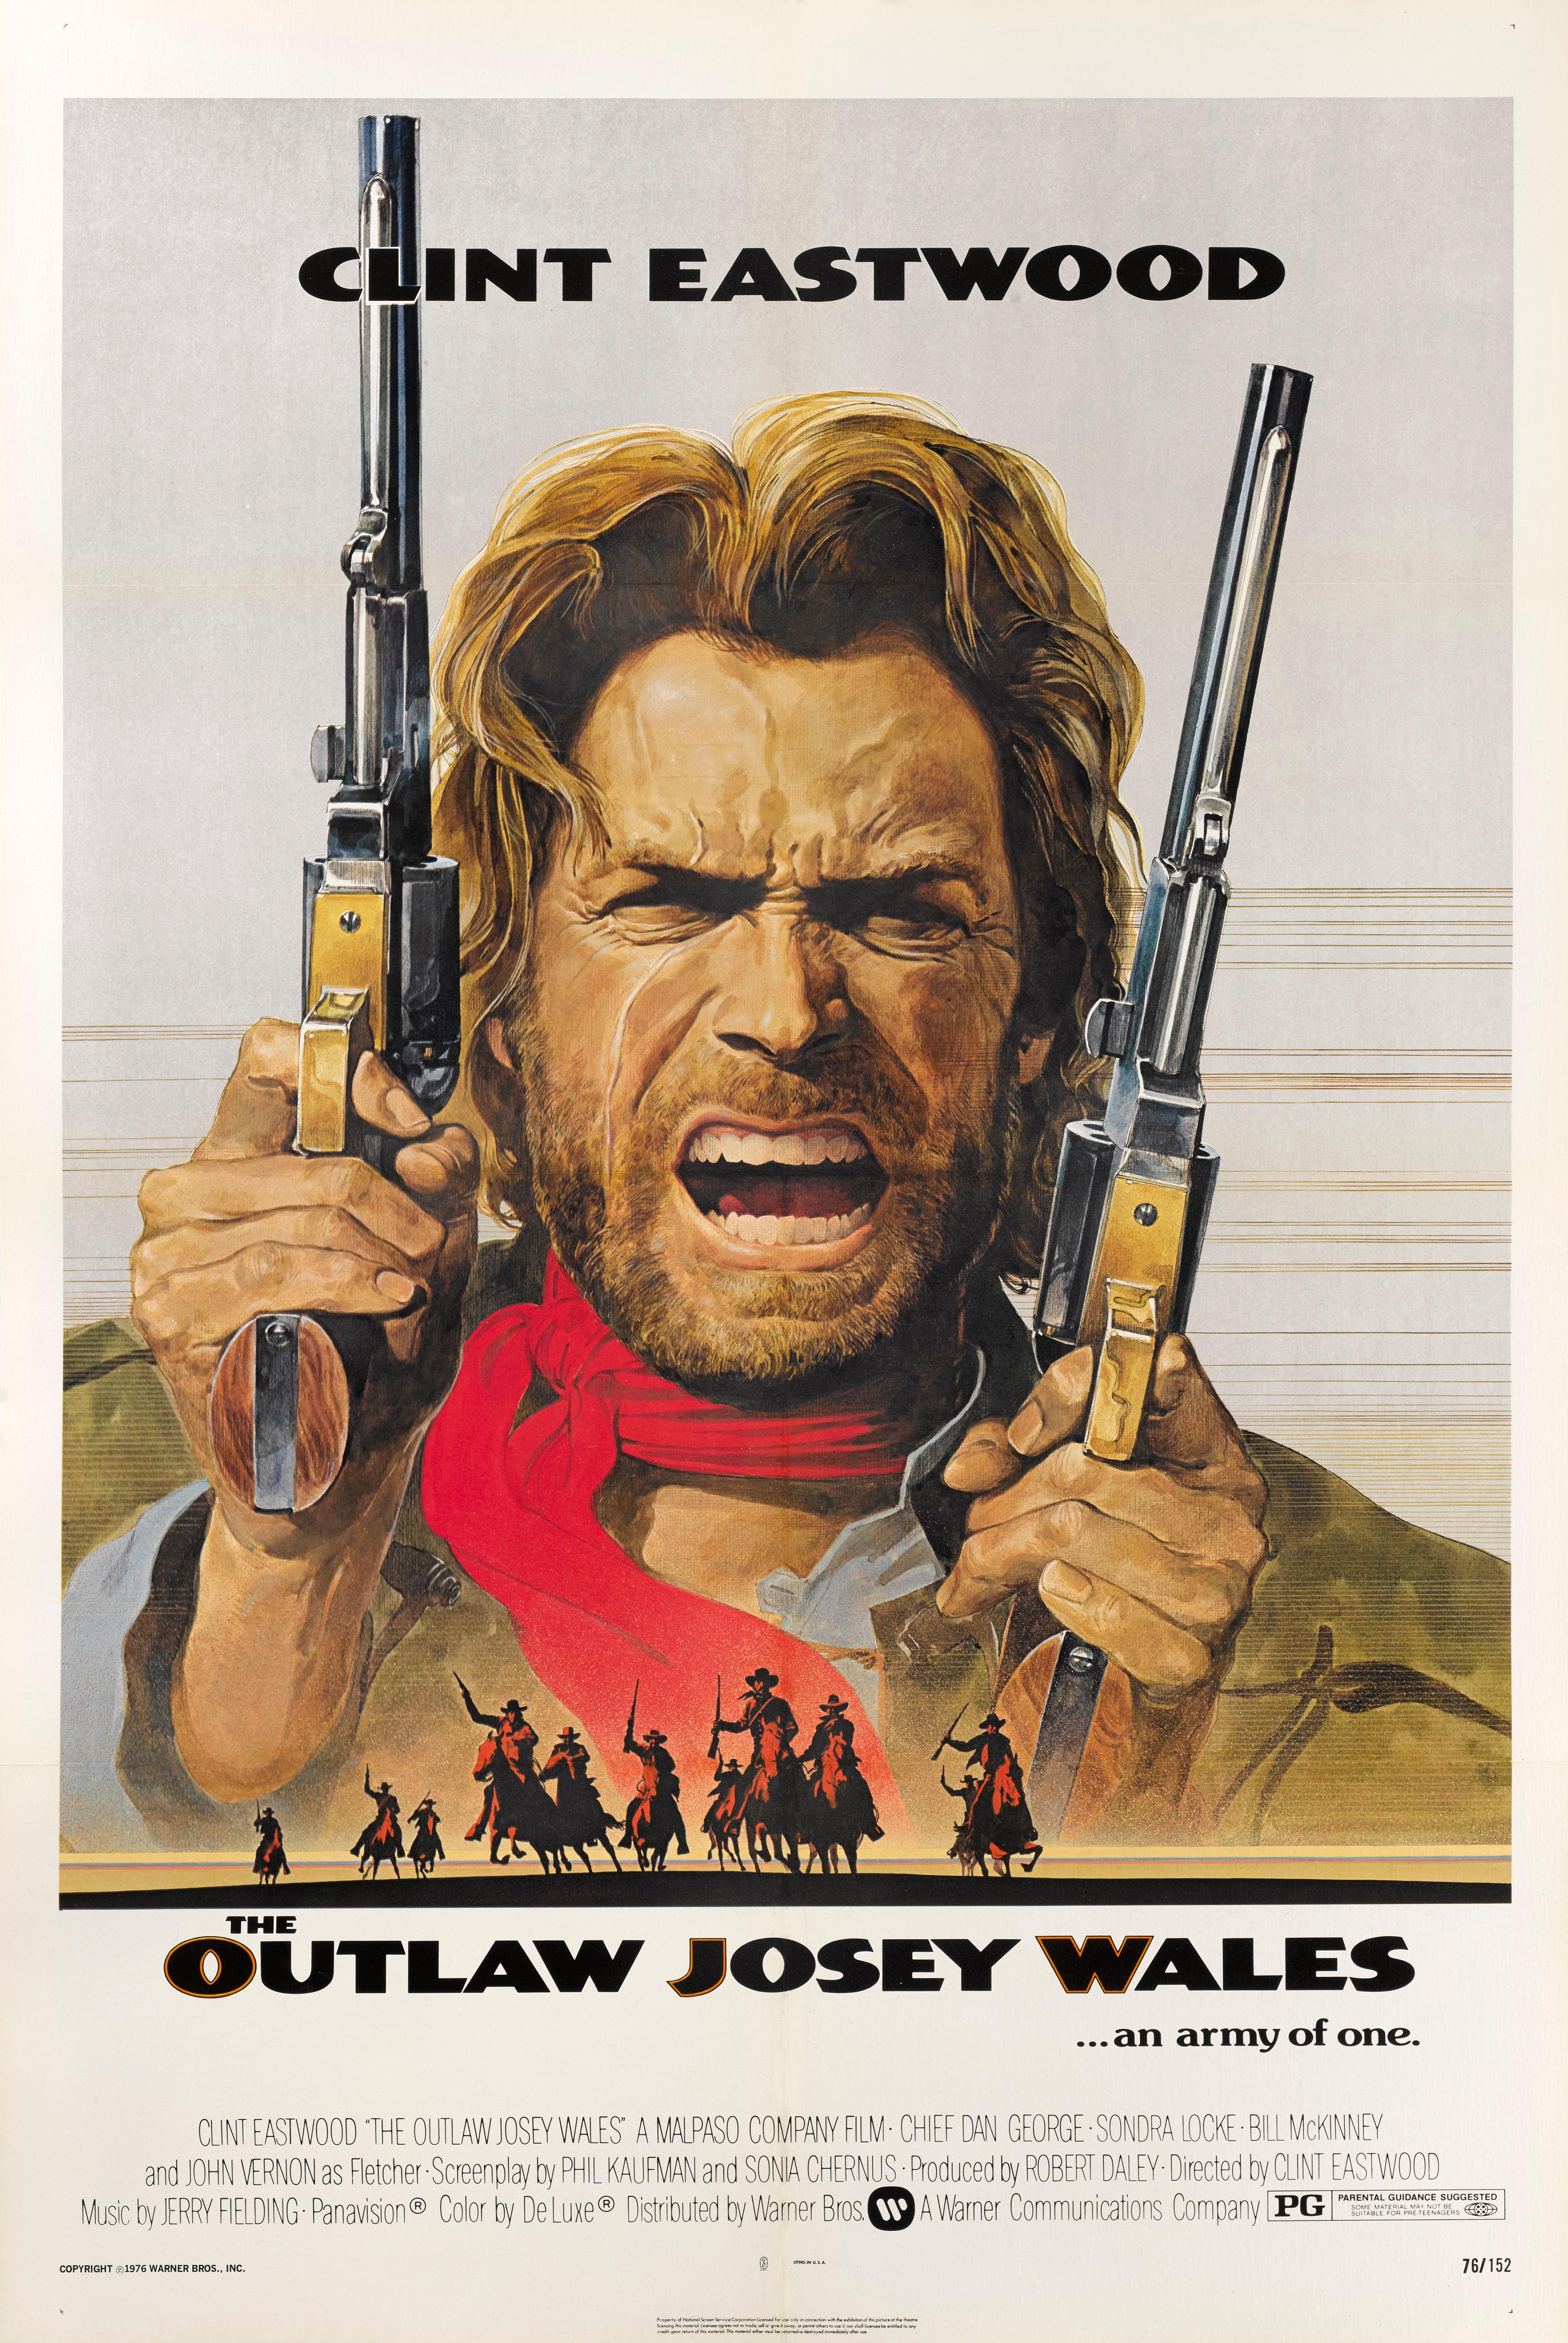 Original US film poster for the 1976 Western The Outlaw Josey Wales.
Directed and starring Clint Eastwood, this western set during and after the American Civil War, is one of the greatest in the genre.
This poster is conservation Linen backed